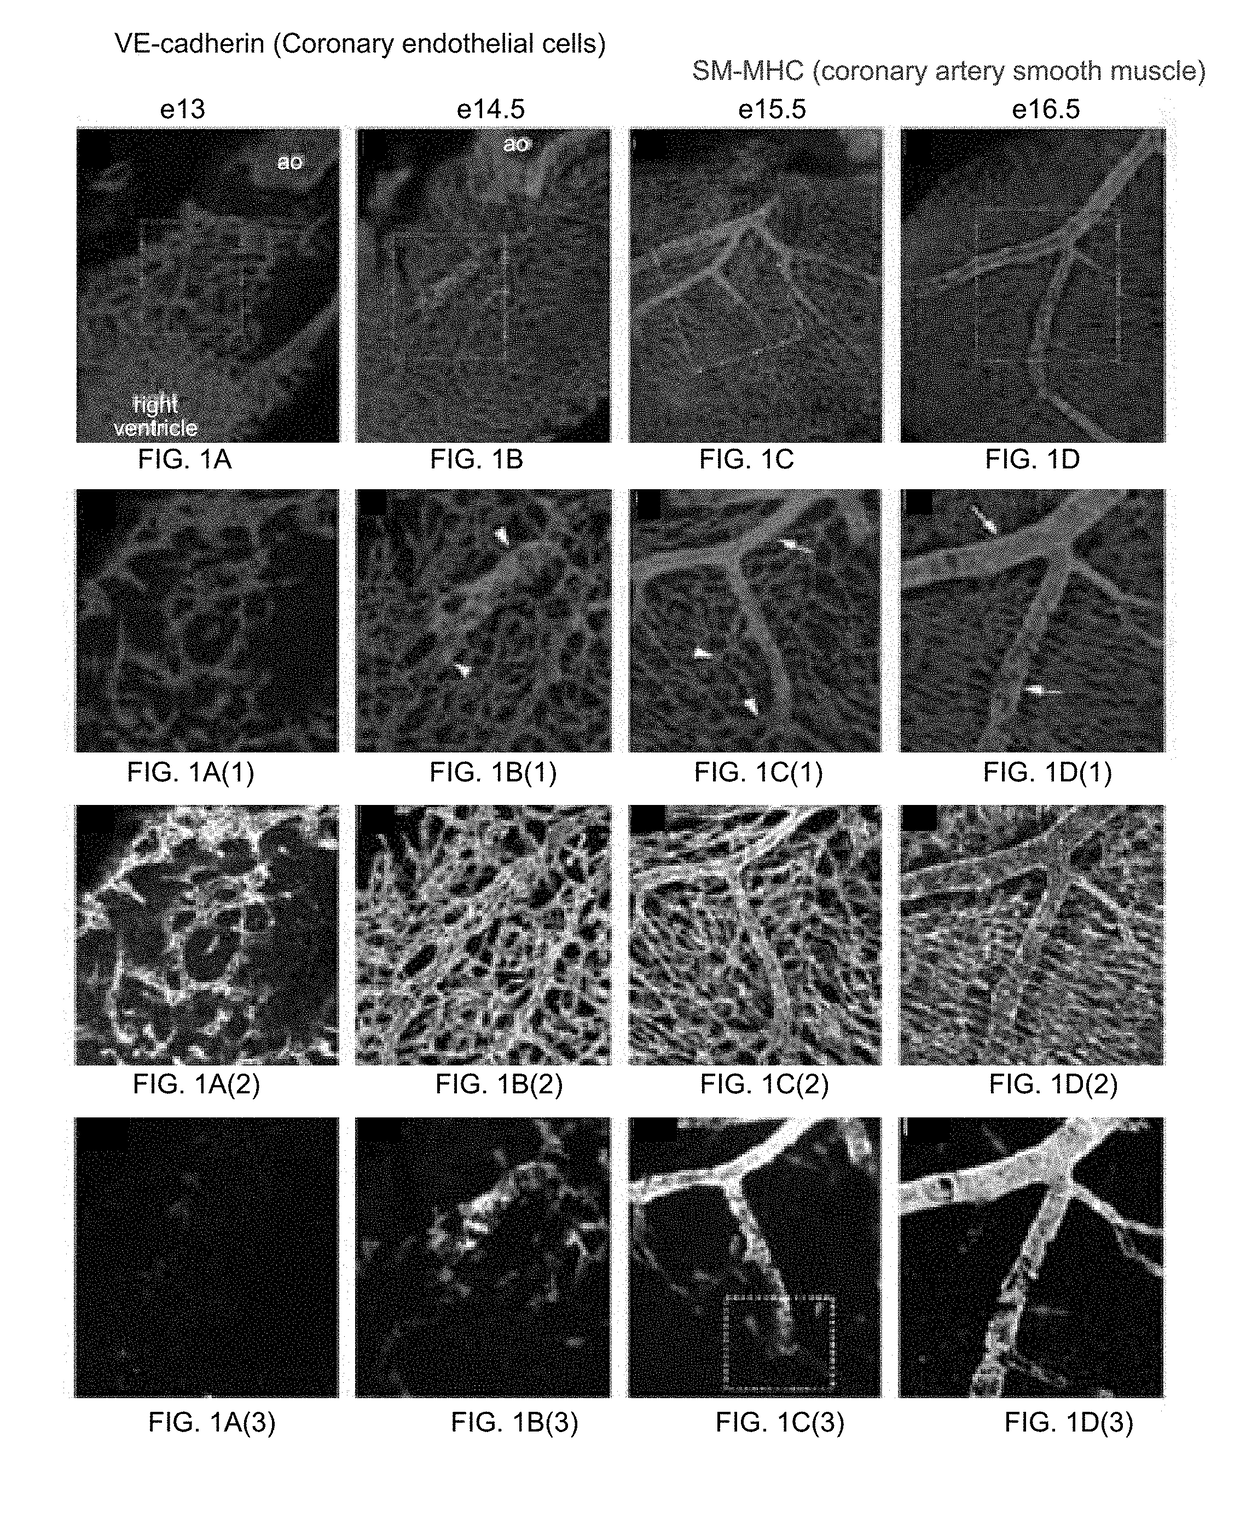 Pericytes are intermediate progenitors for epicardial derived coronary artery smooth muscle